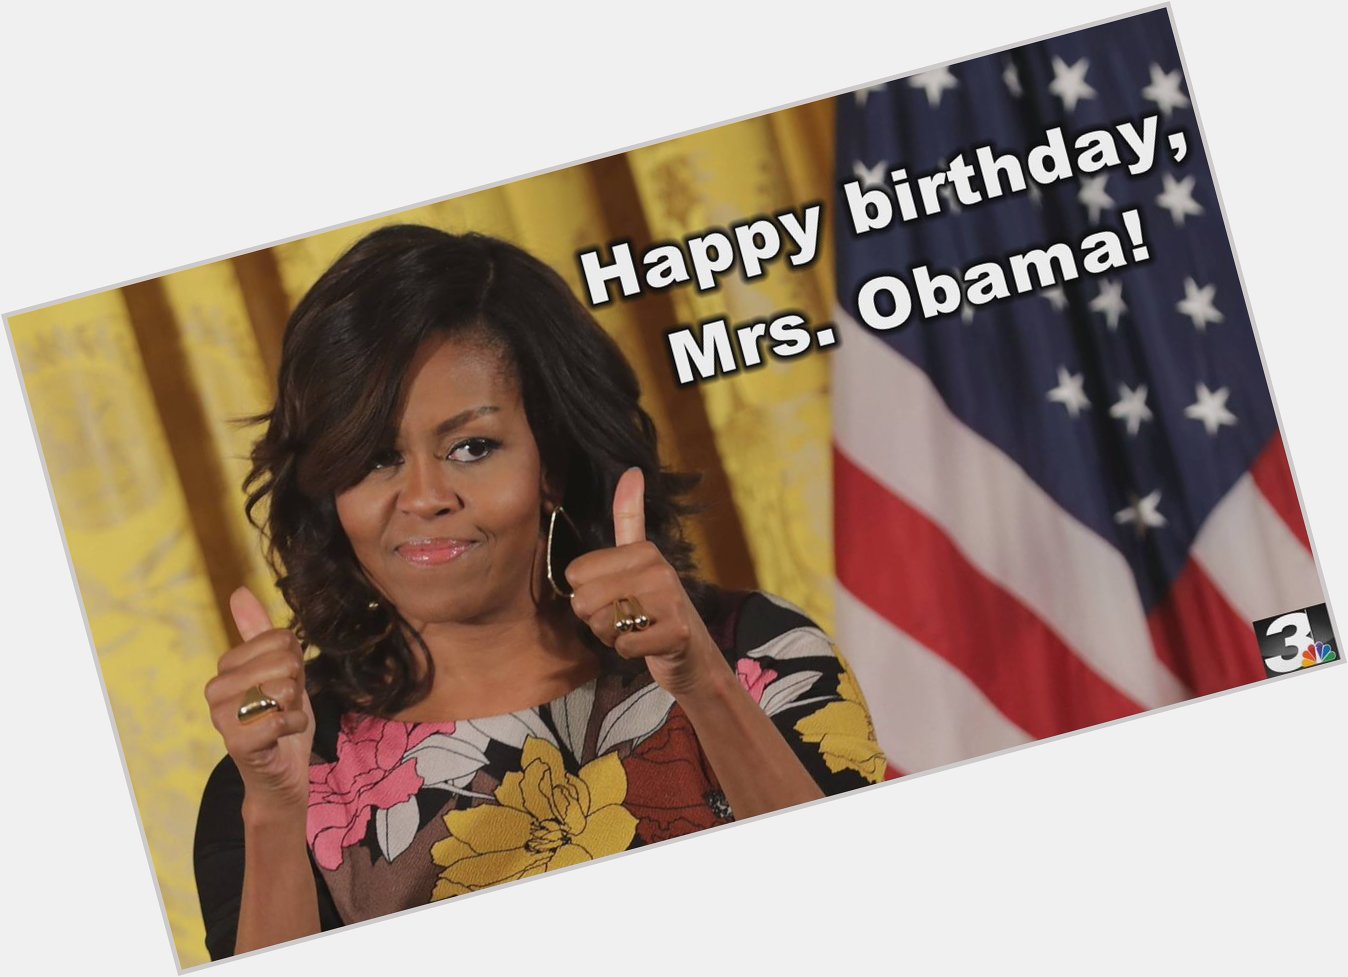 Happy birthday, Michelle Obama! She\s 53 years old today! 